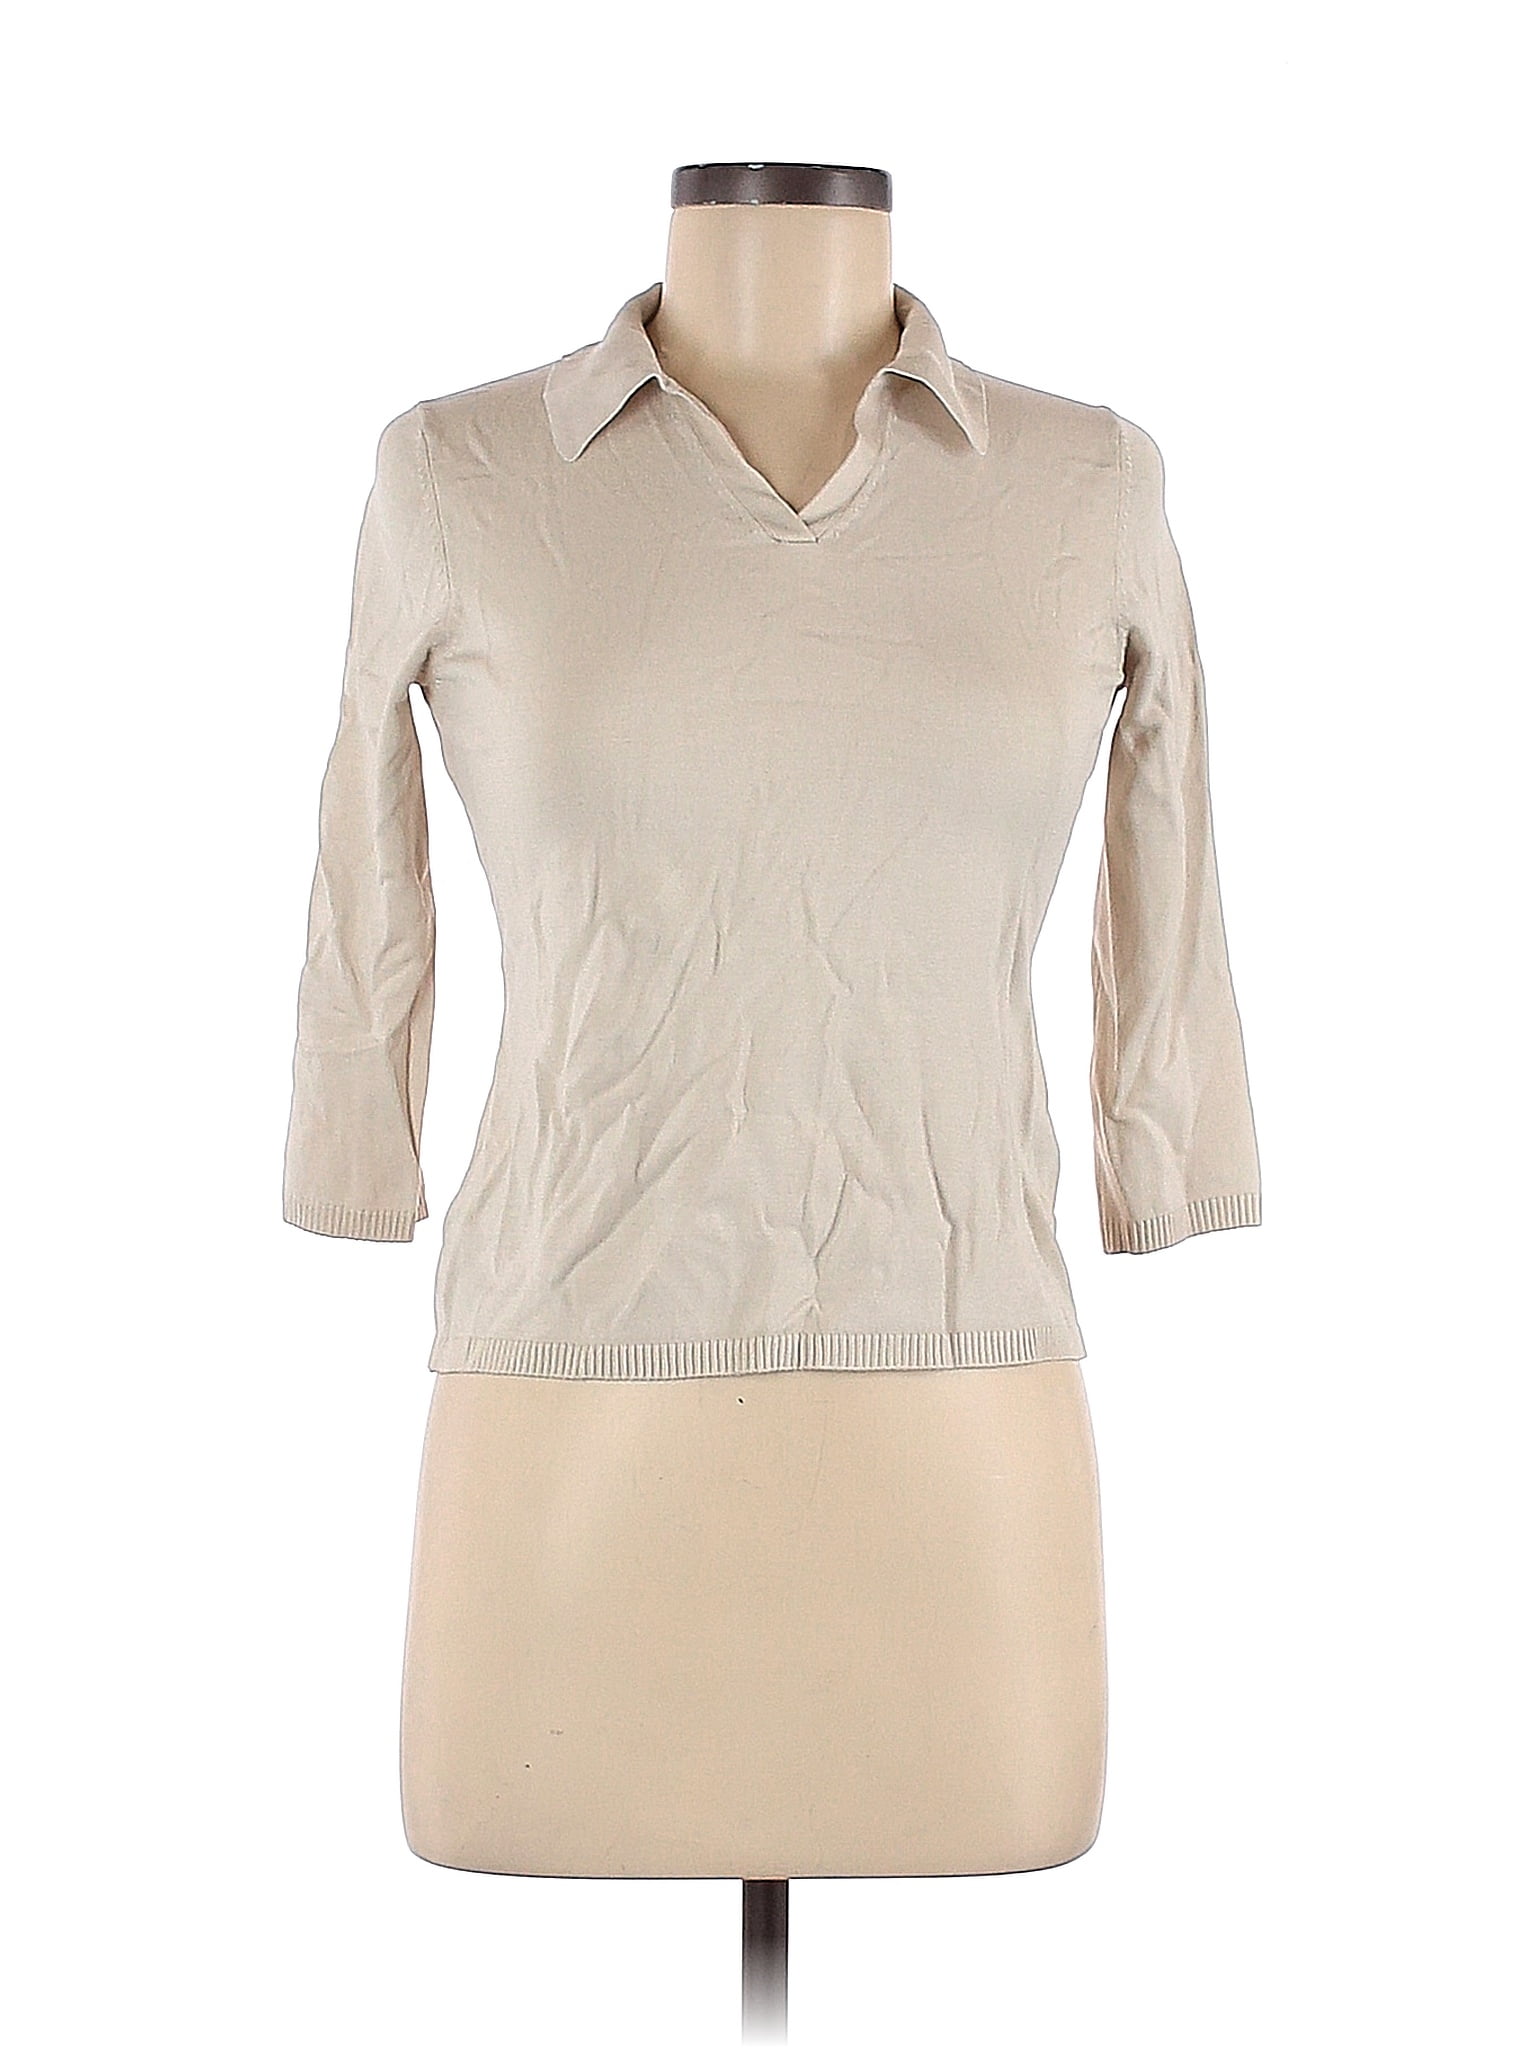 Josephine Chaus Solid Tan 3/4 Sleeve Silk Top Size P - 84% off